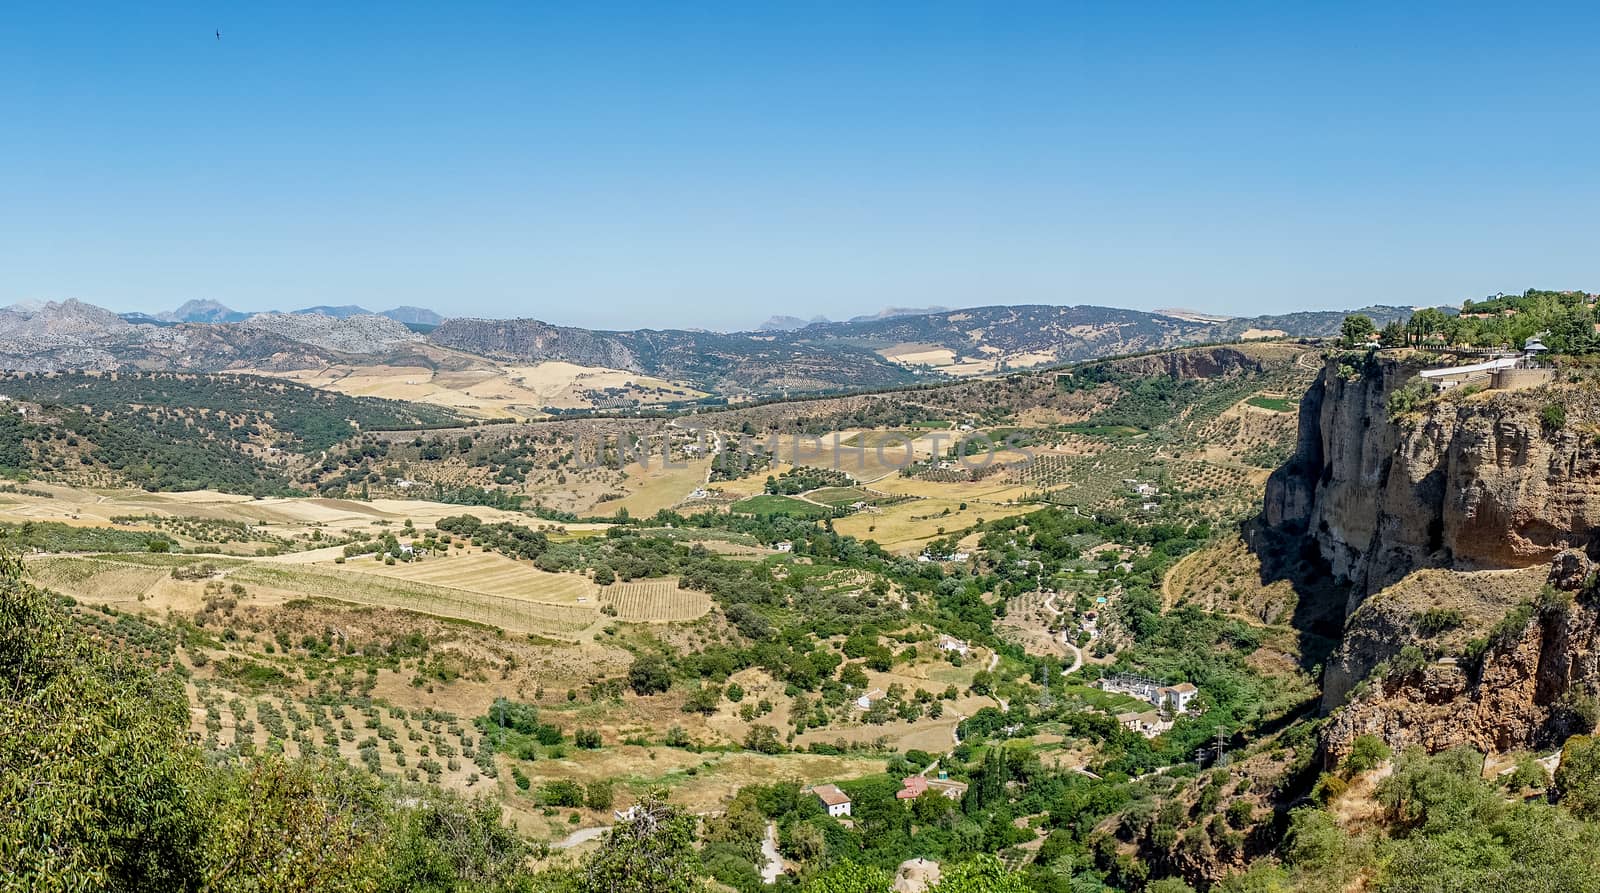 Greenery, Mountains, Farms and Fields on the outskirts of Ronda  by ramana16